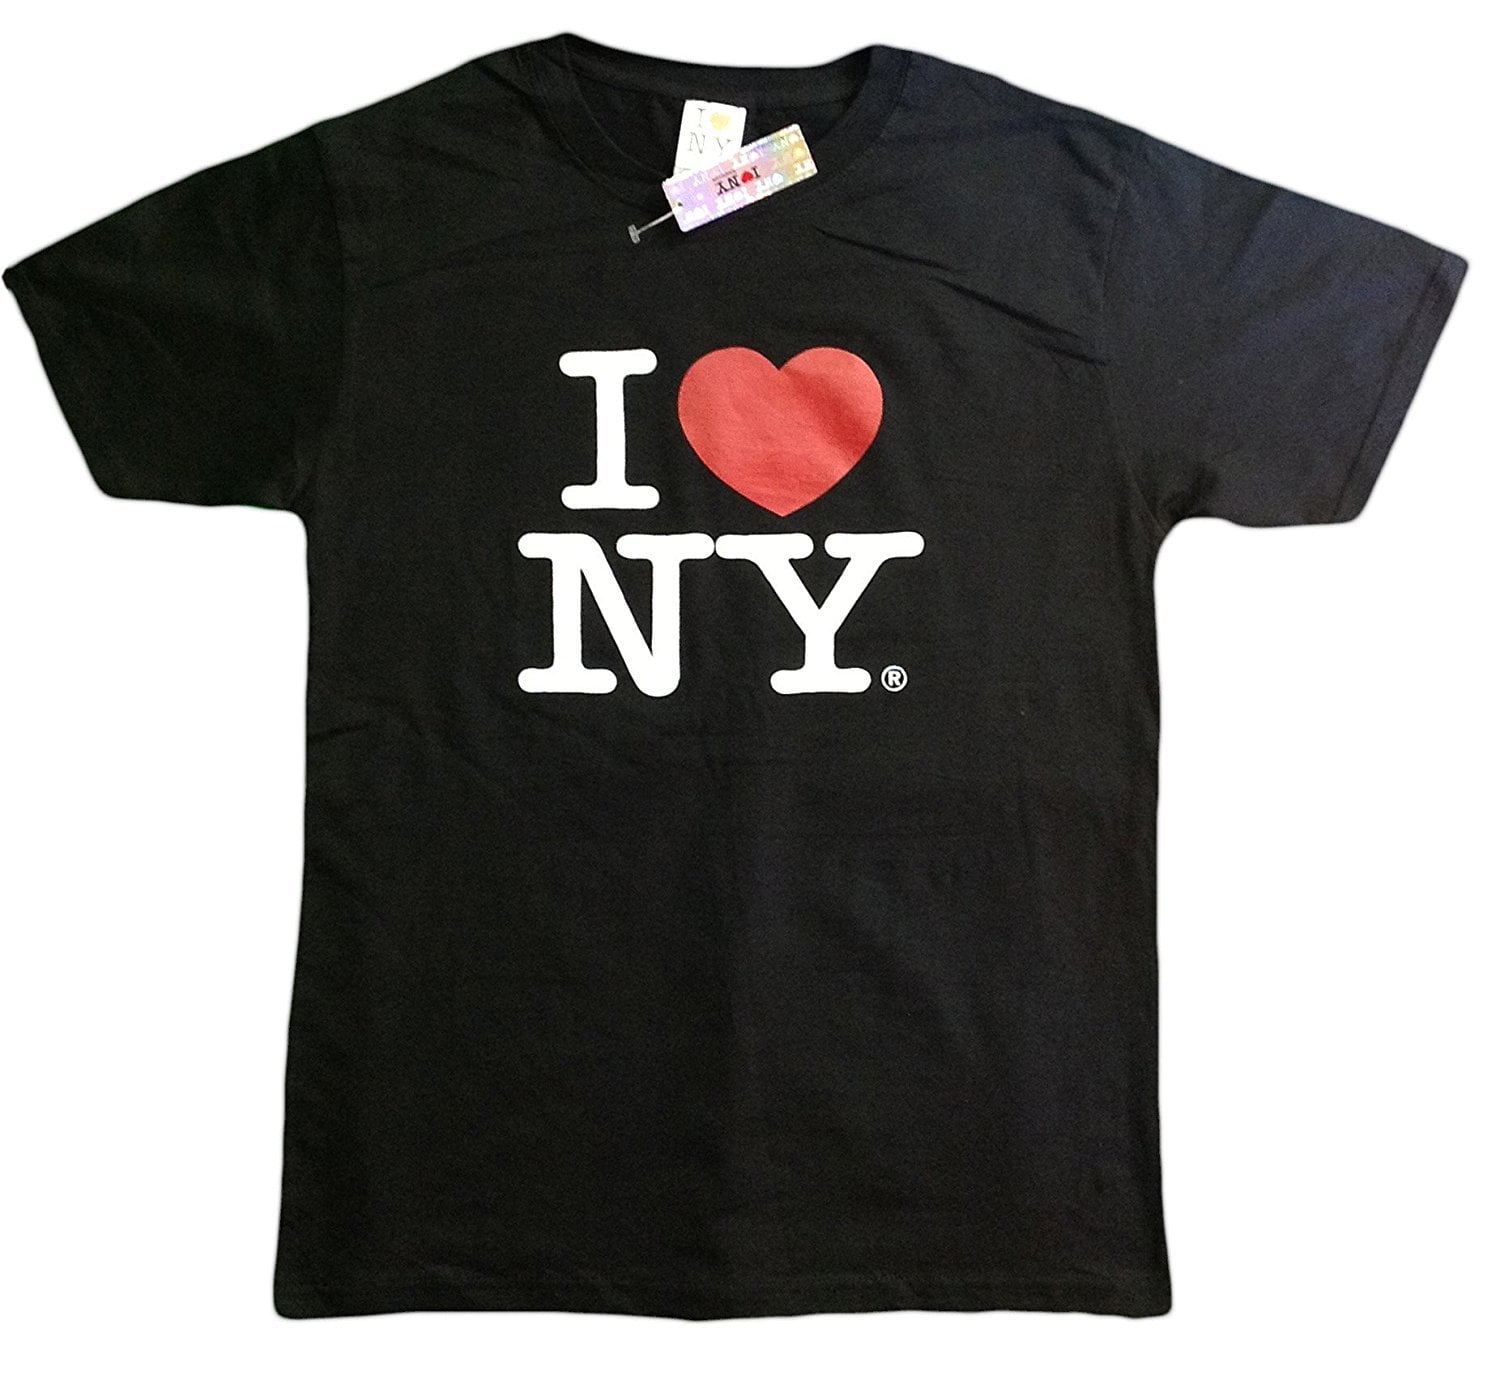 Mint Green New York City T-Shirt Screen Print NYC Toddler Tee Gift Love NY 2t 3t 